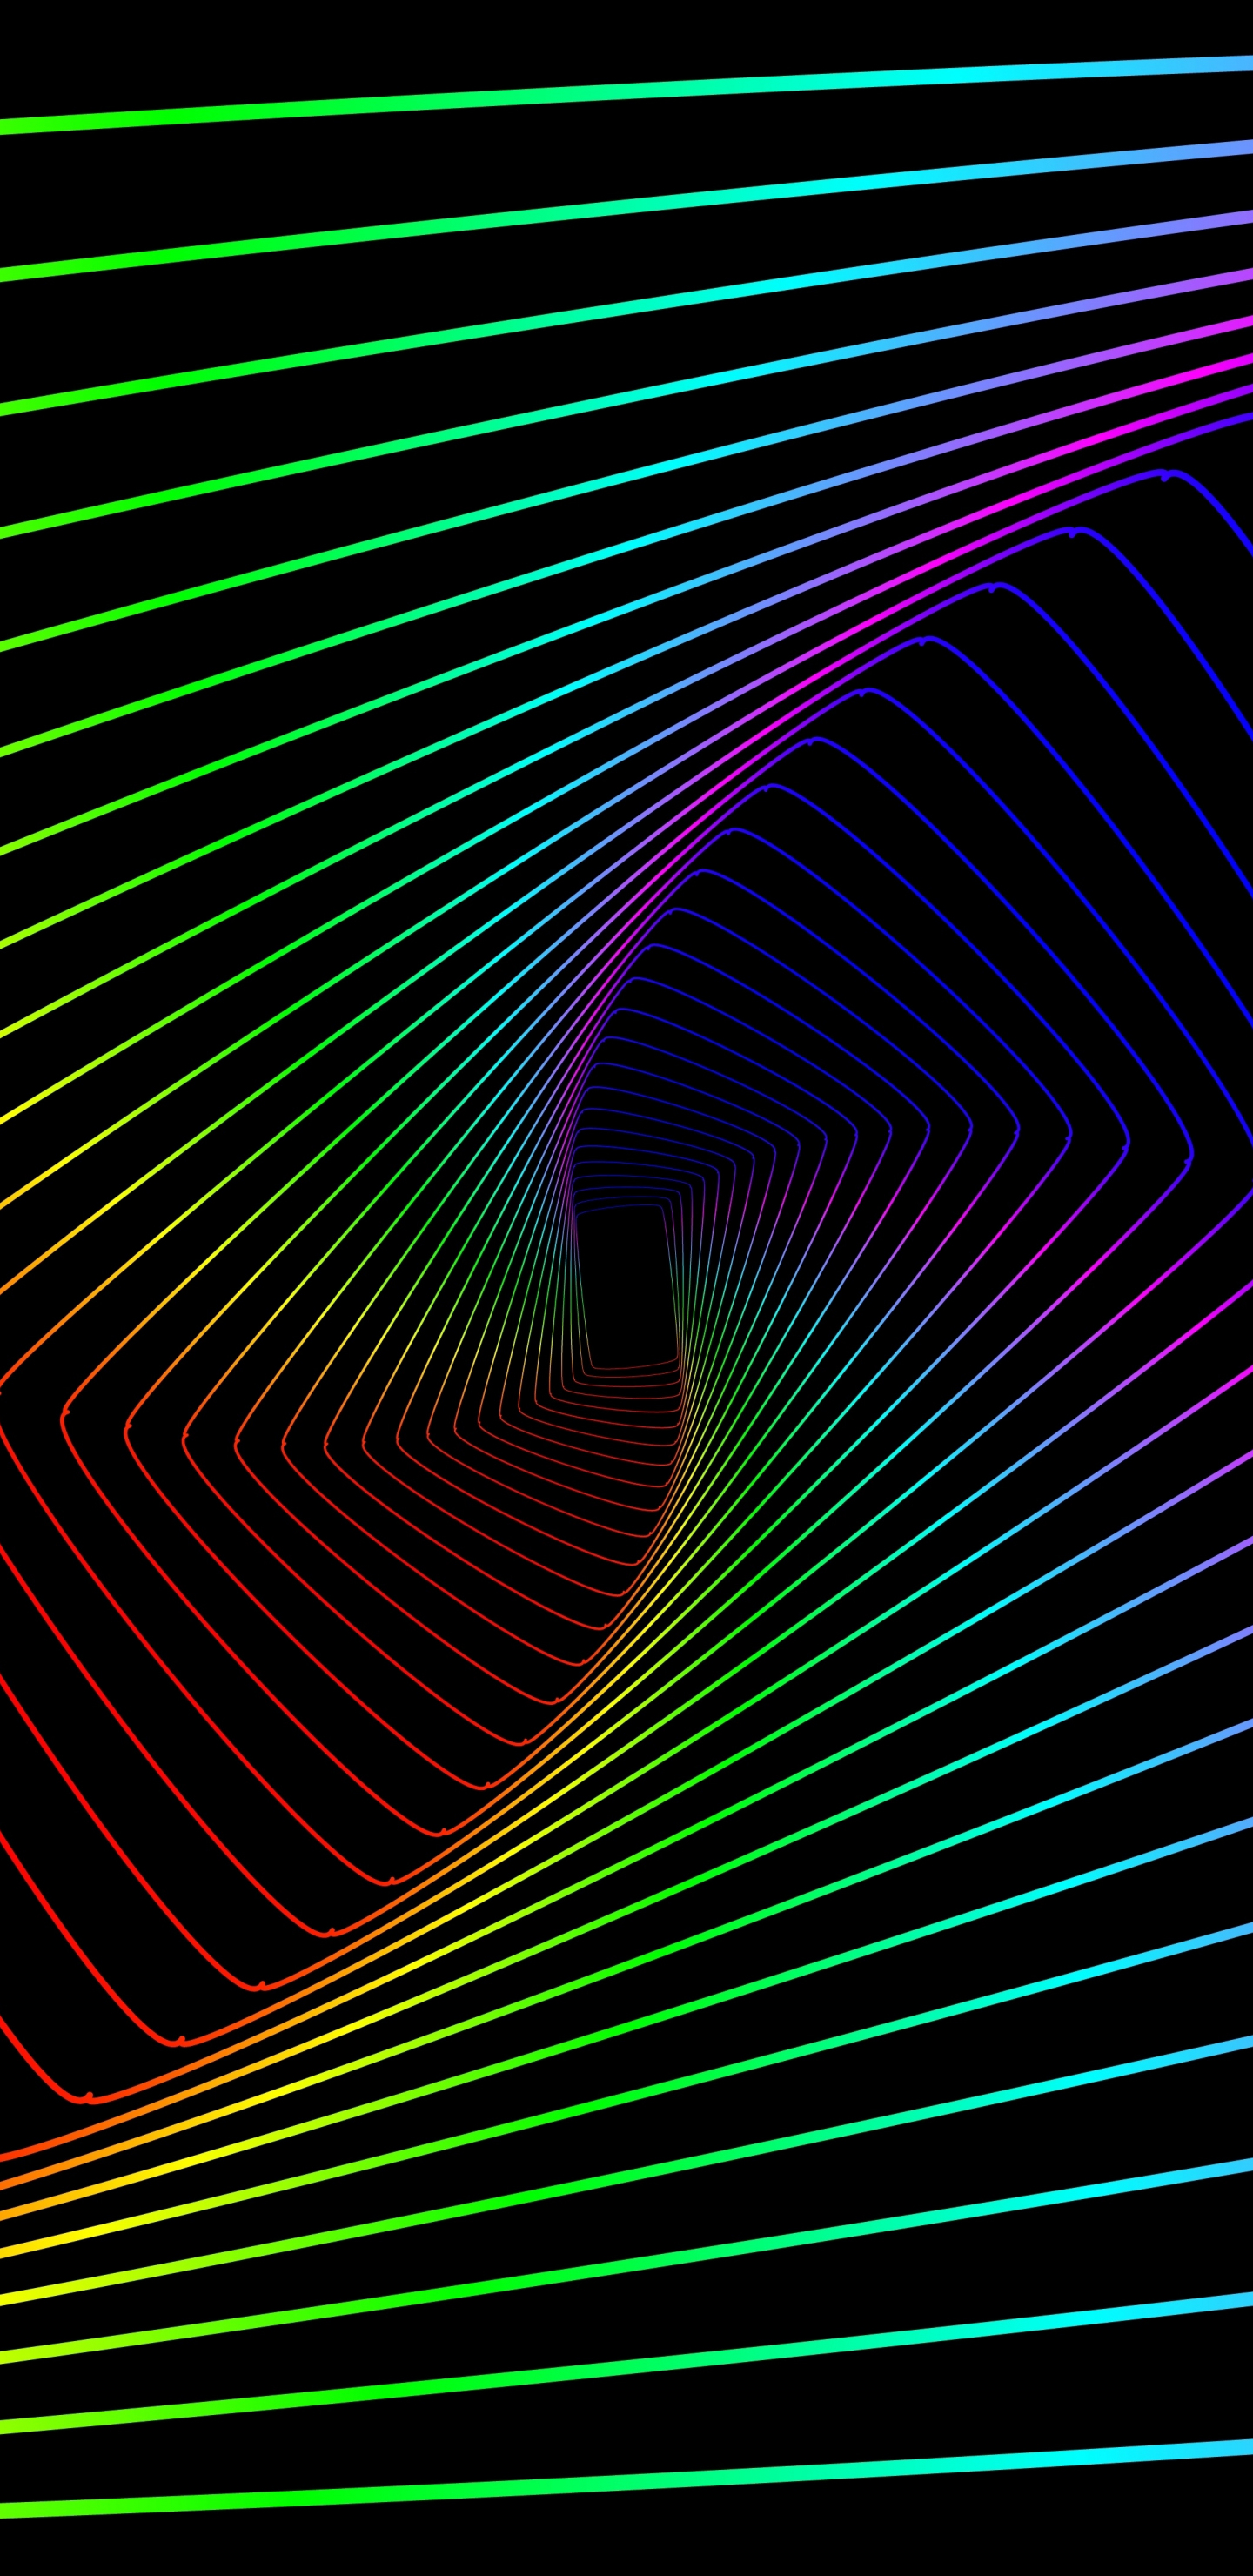 Colorful lines, swirl, abstract, minimal, 1440x2960 wallpaper